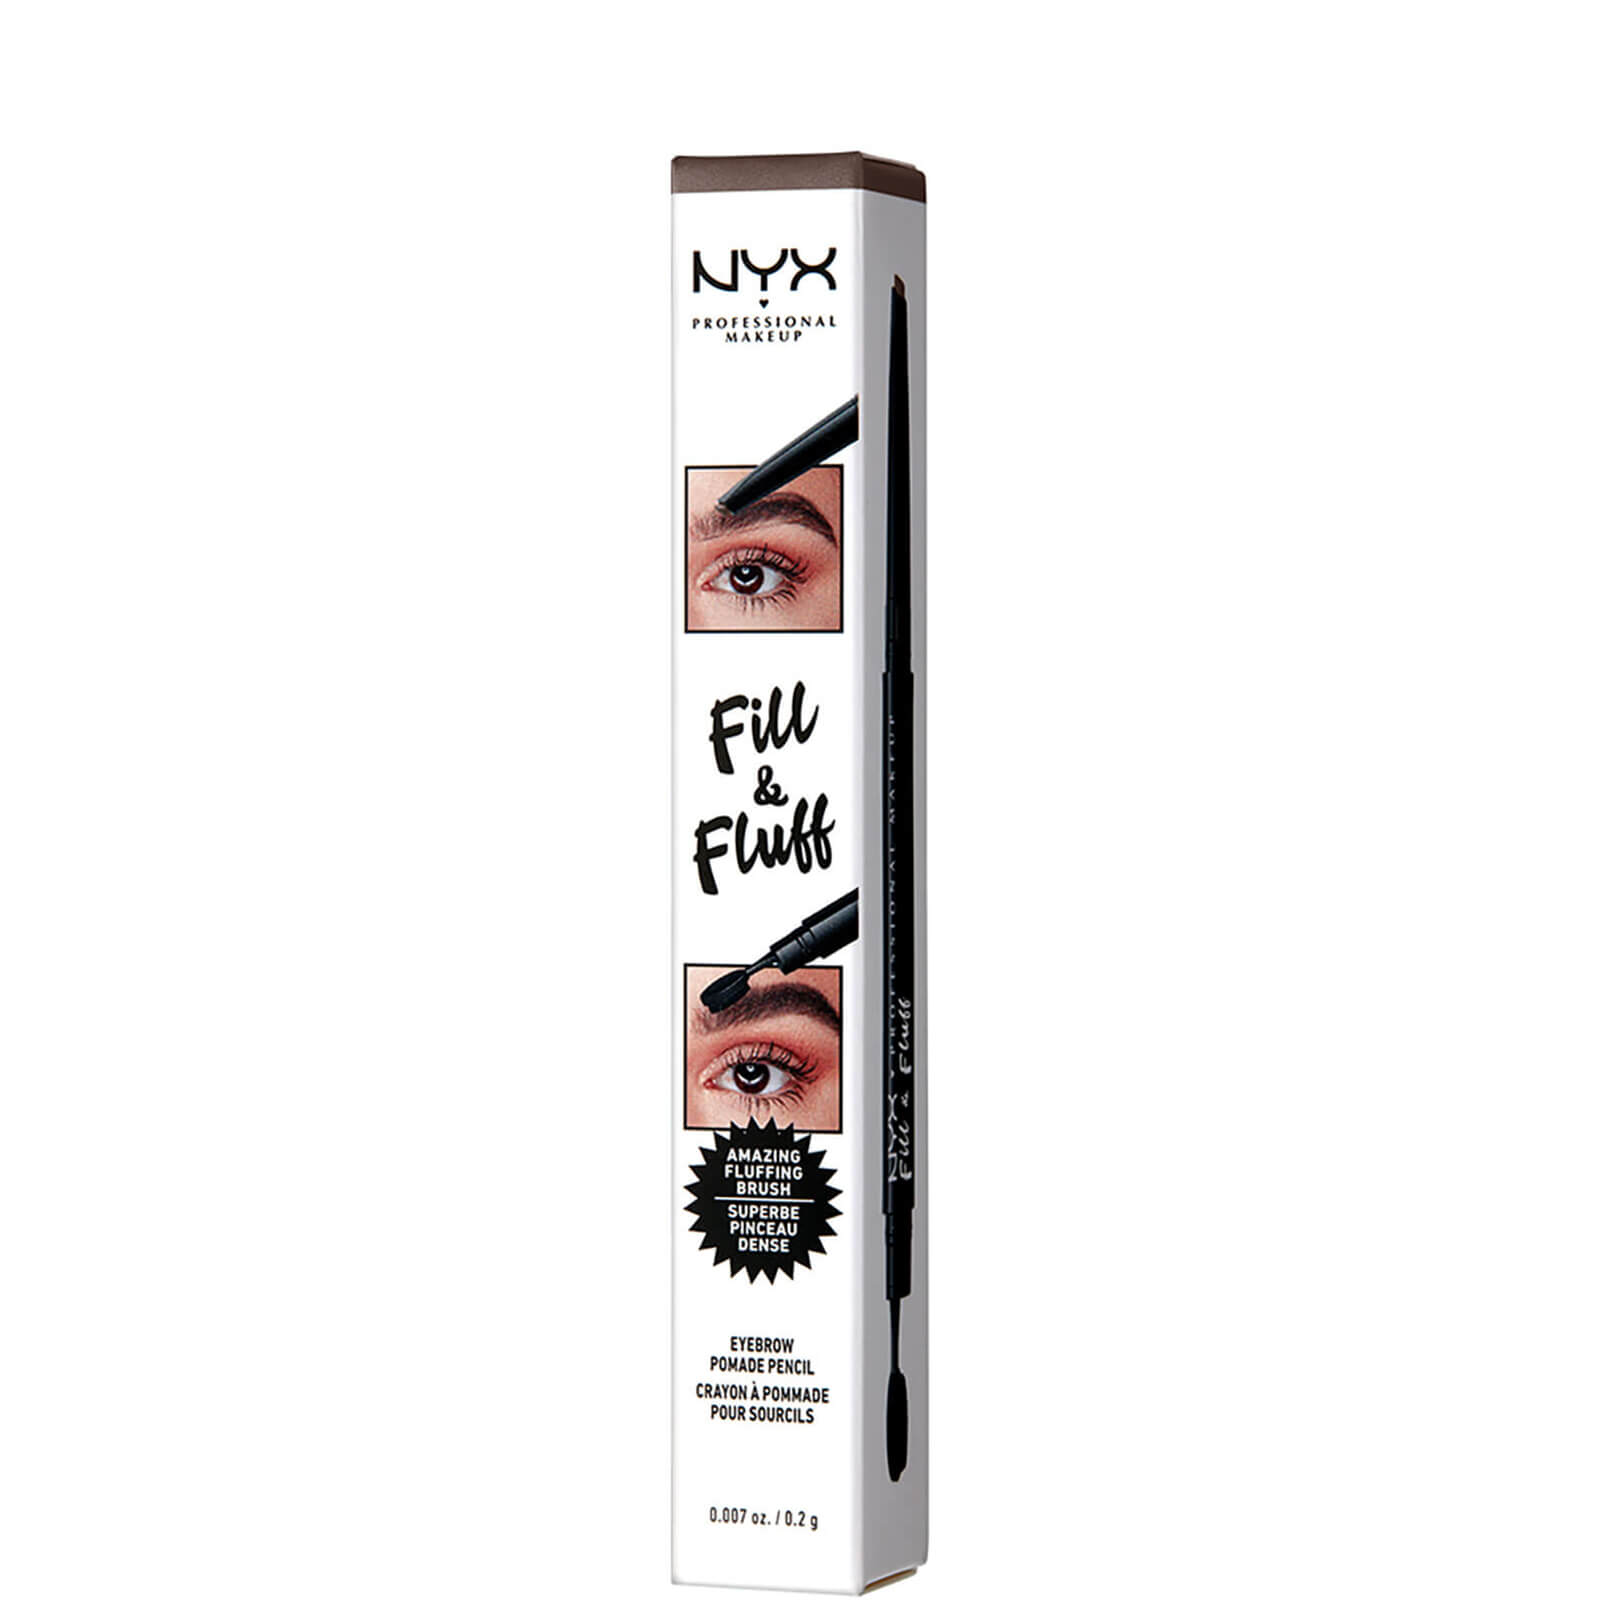 NYX Professional Makeup Fill and Fluff Eyebrow Pomade Pencil 0.2g (Various Shades) - Chocolate von NYX Professional Makeup